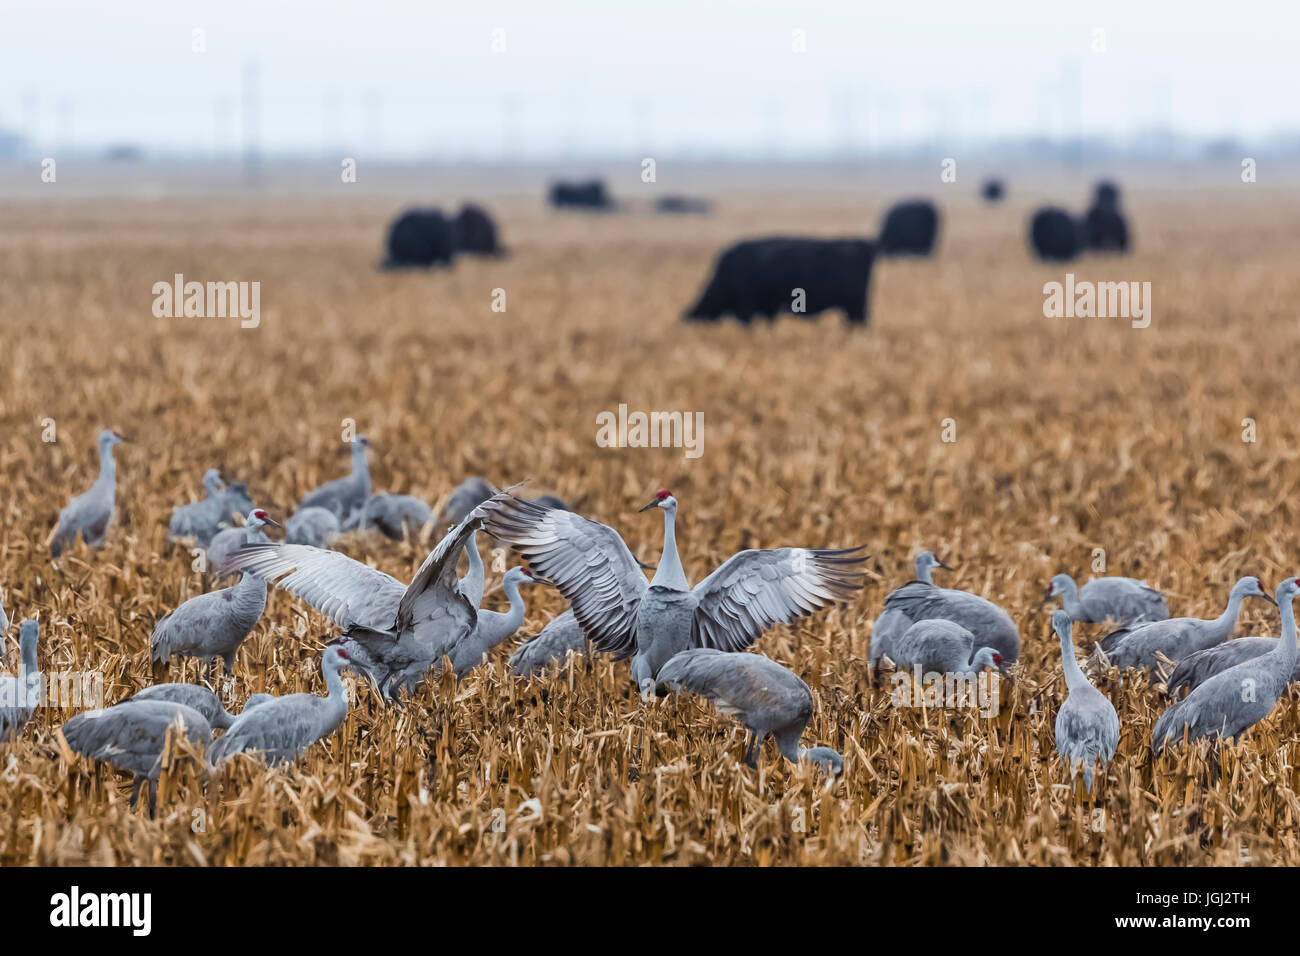 Sandhill Cranes, Antigone canadensis, feeding near Black Angus Cattle in cornfields in March at the Platte River Valley migration stopover near Kearne Stock Photo